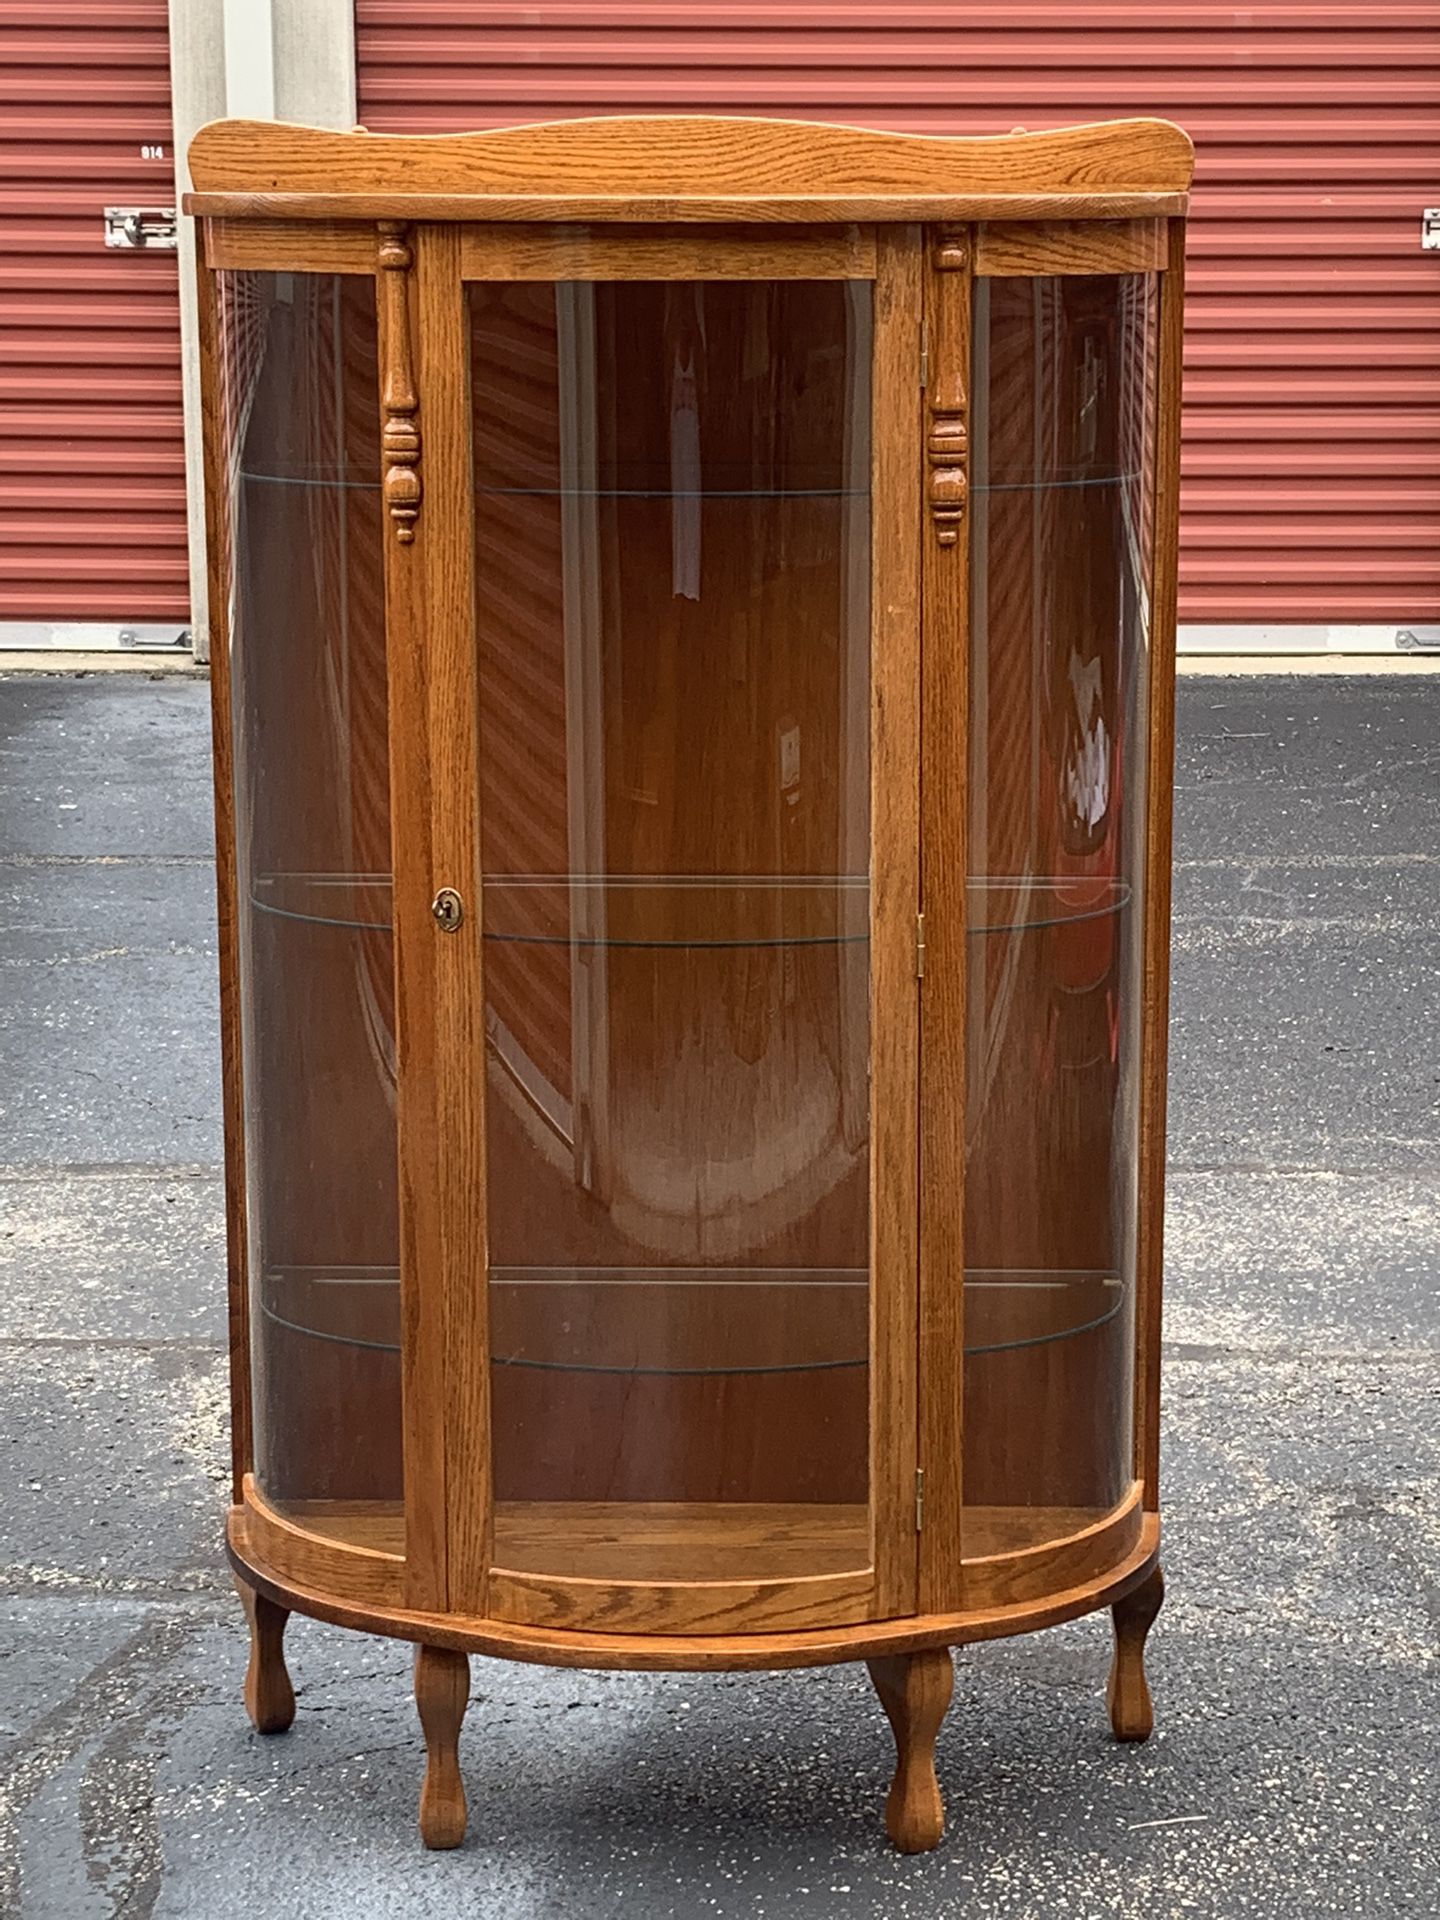 Wood China Curio Cabinet with Glass Door, Glass Shelves, And 1 Key